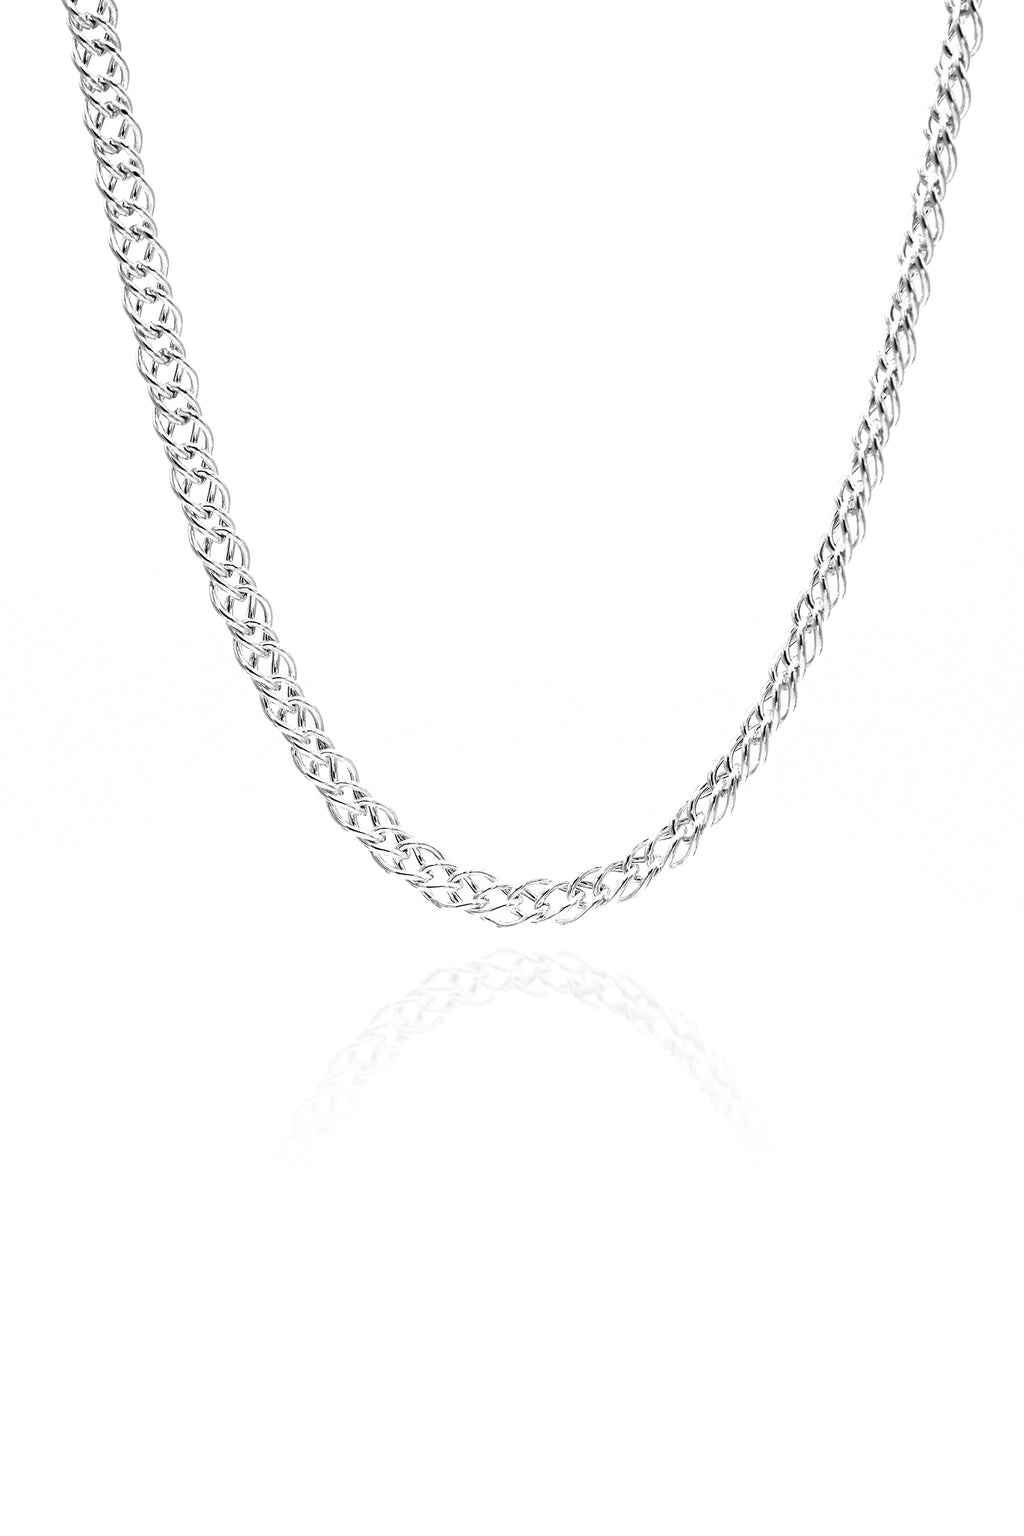 Handmade Curb Chain Silver Necklace (NG201019590)